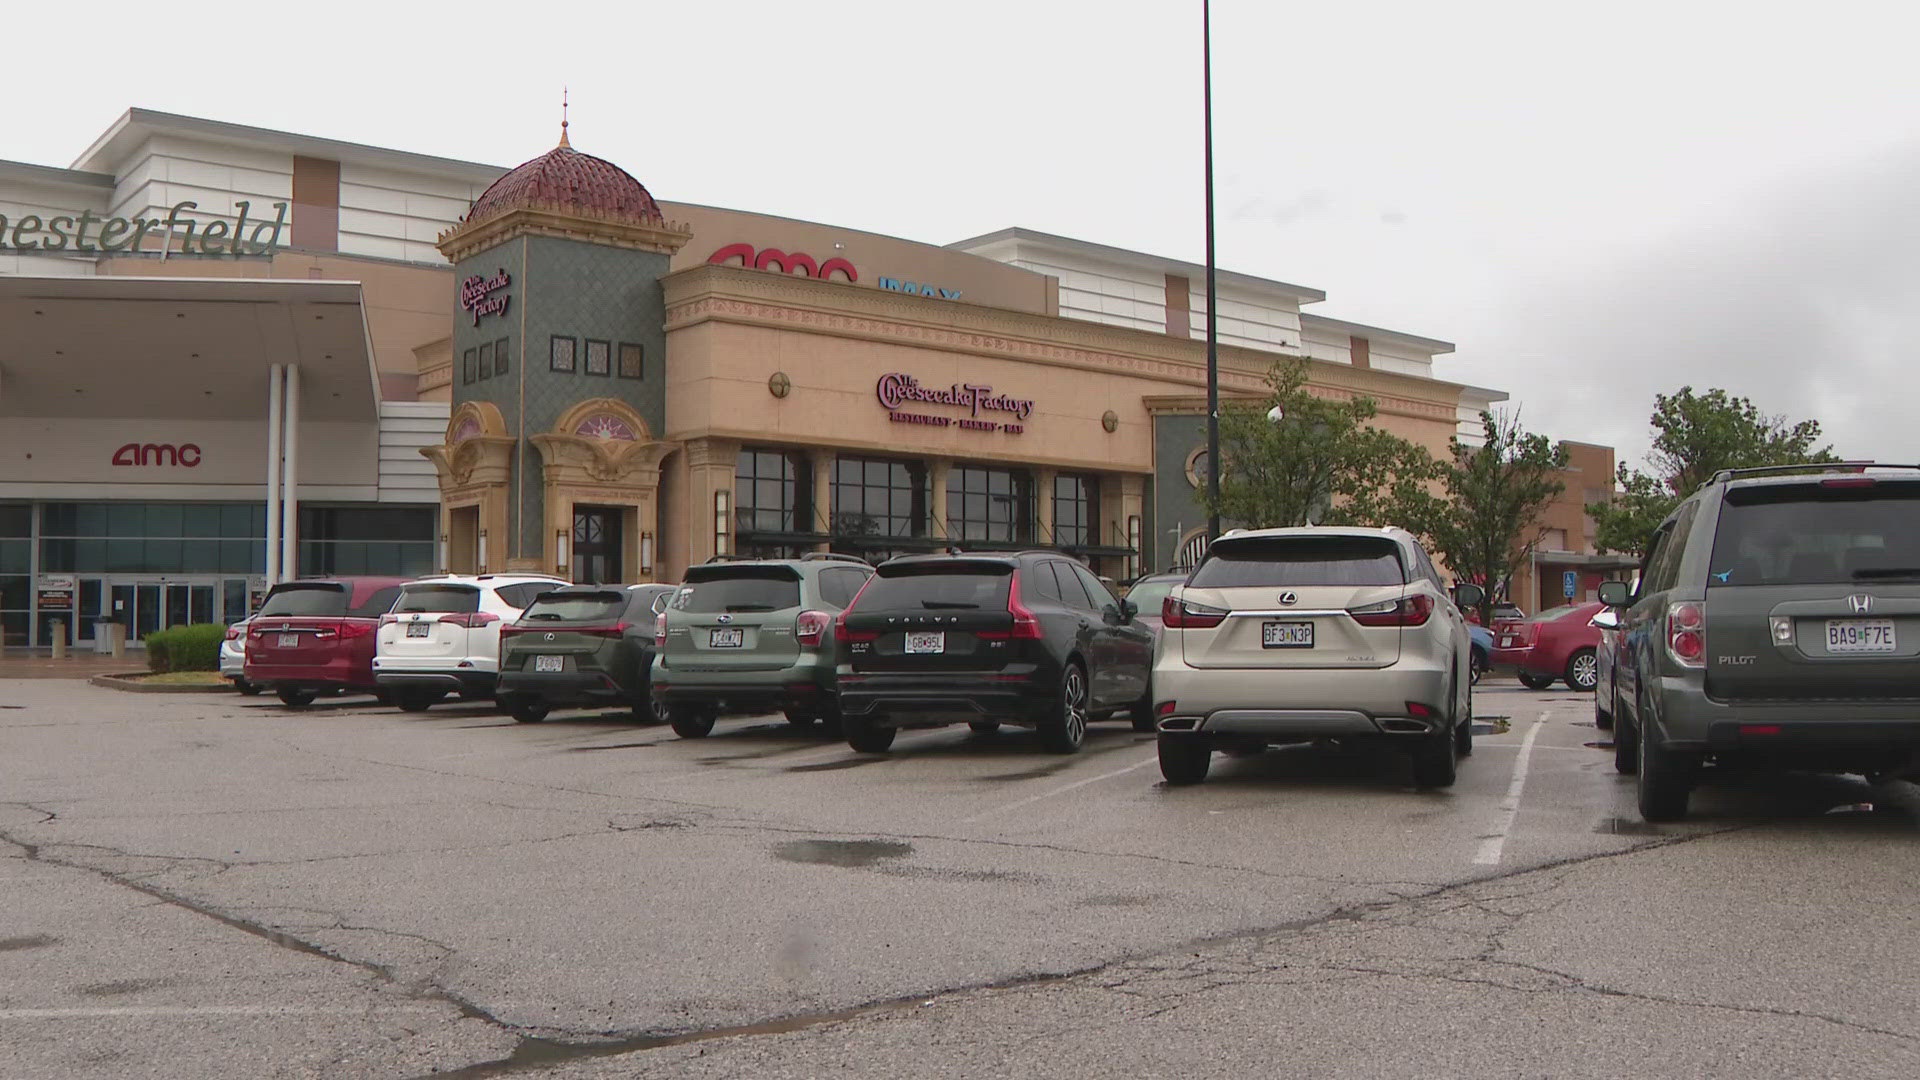 The restaurant’s location at Chesterfield Mall will permanently shut down Aug. 31. But there is a possibility it can find a new life in Chesterfield.